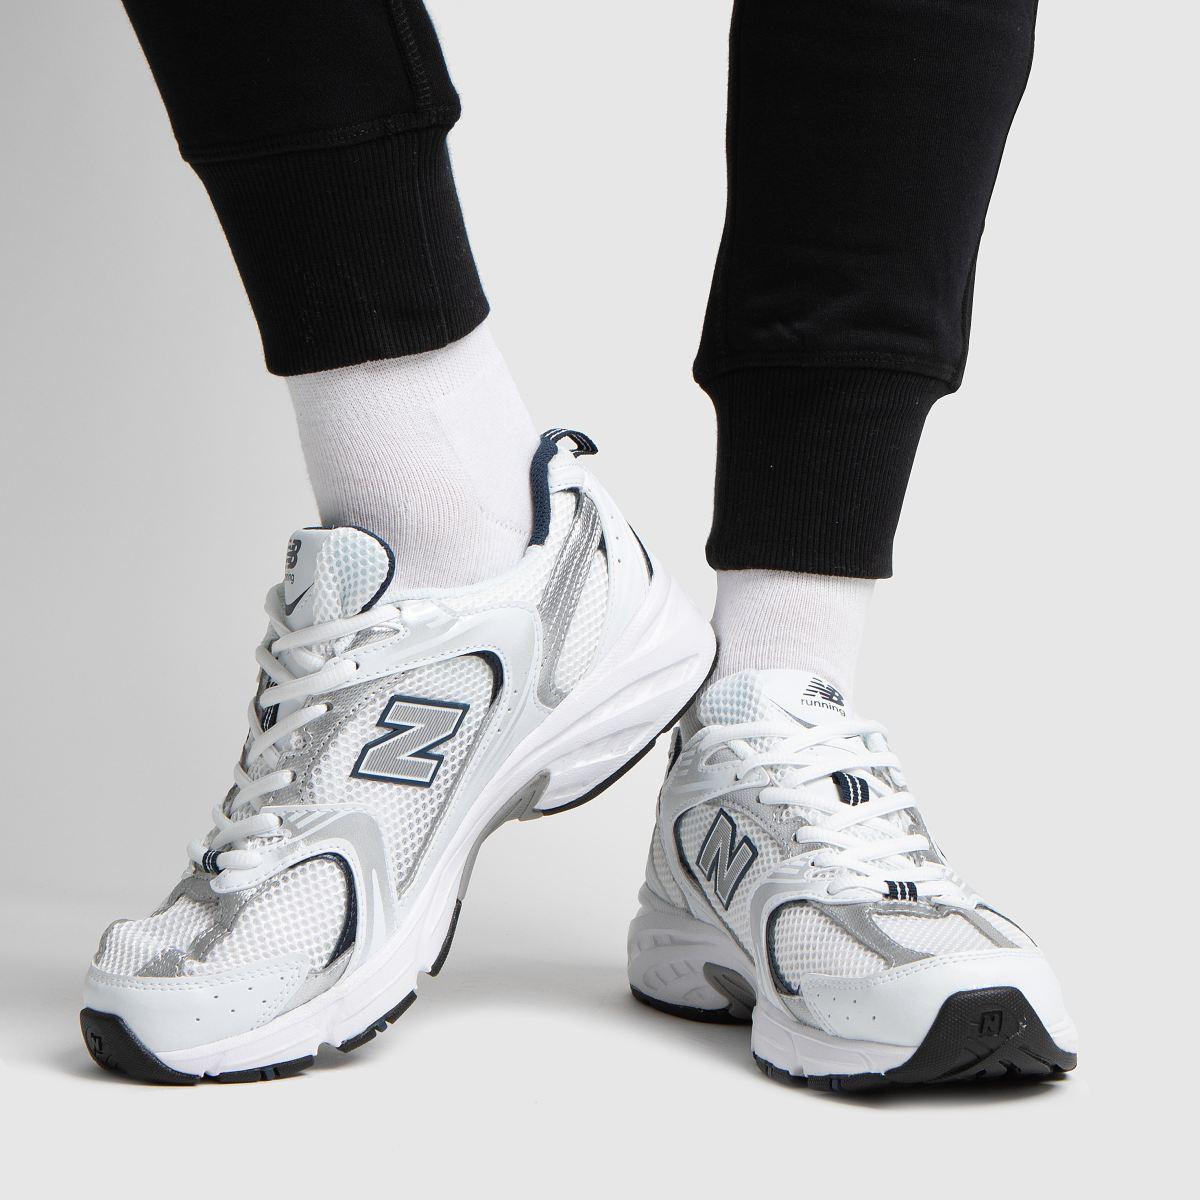 new balance 530 metallic silverLimited Special Sales and Special Offers –  Women's & Men's Sneakers & Sports Shoes - Shop Athletic Shoes Online >  OFF-53% Free Shipping & Fast Shippment!